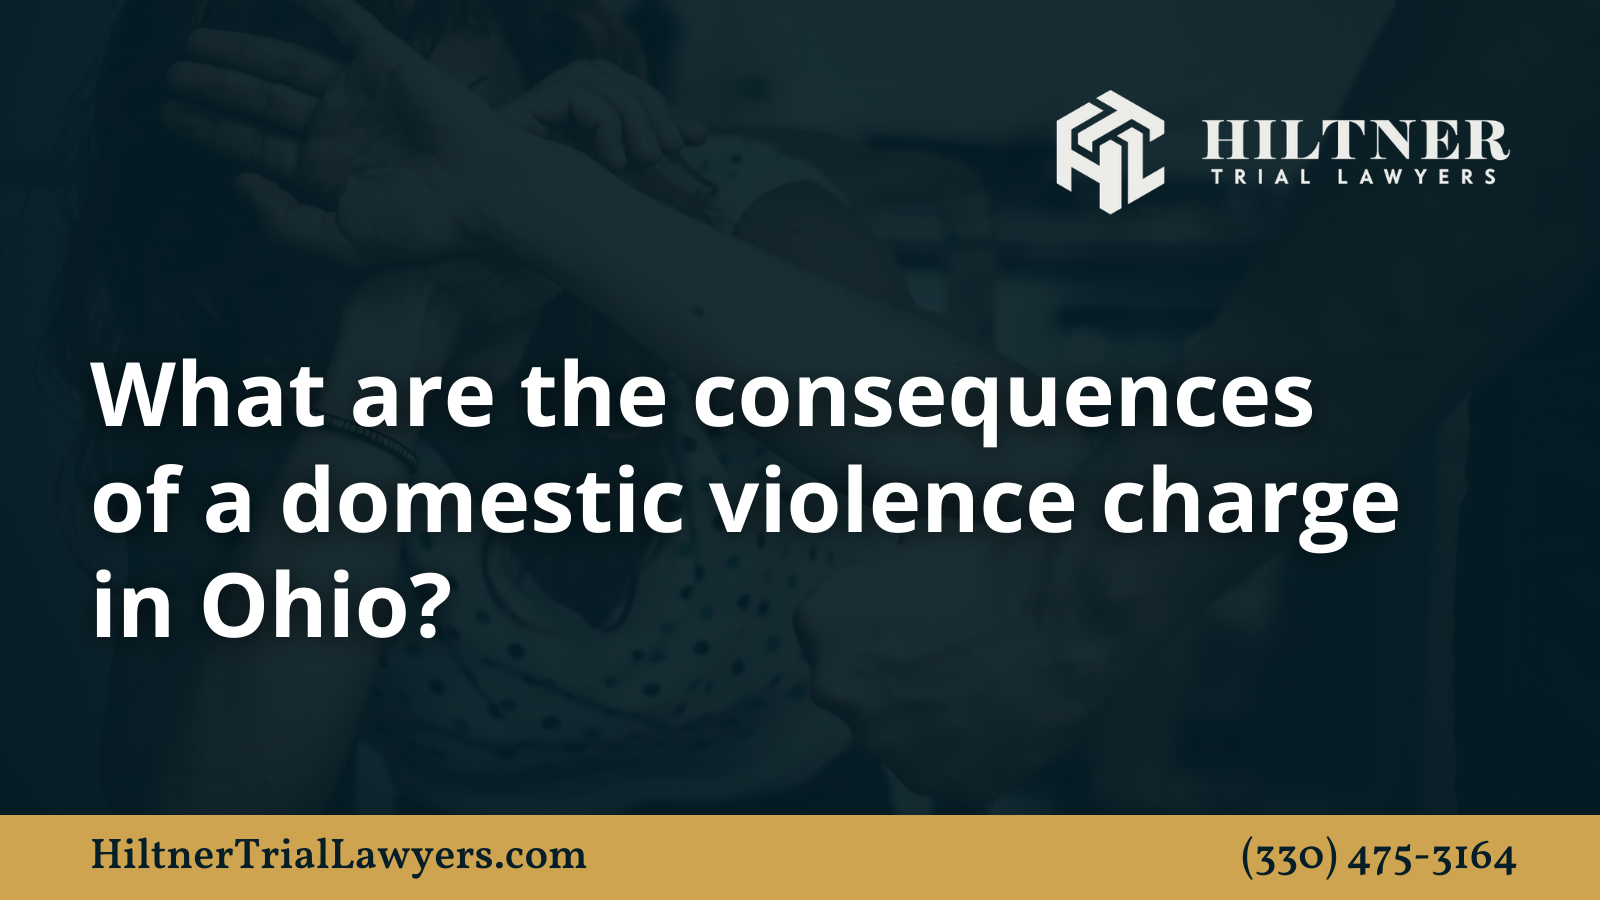 What are the consequences of a domestic violence charge in Ohio - Hiltner Trial Lawyers Ohio - max hiltner